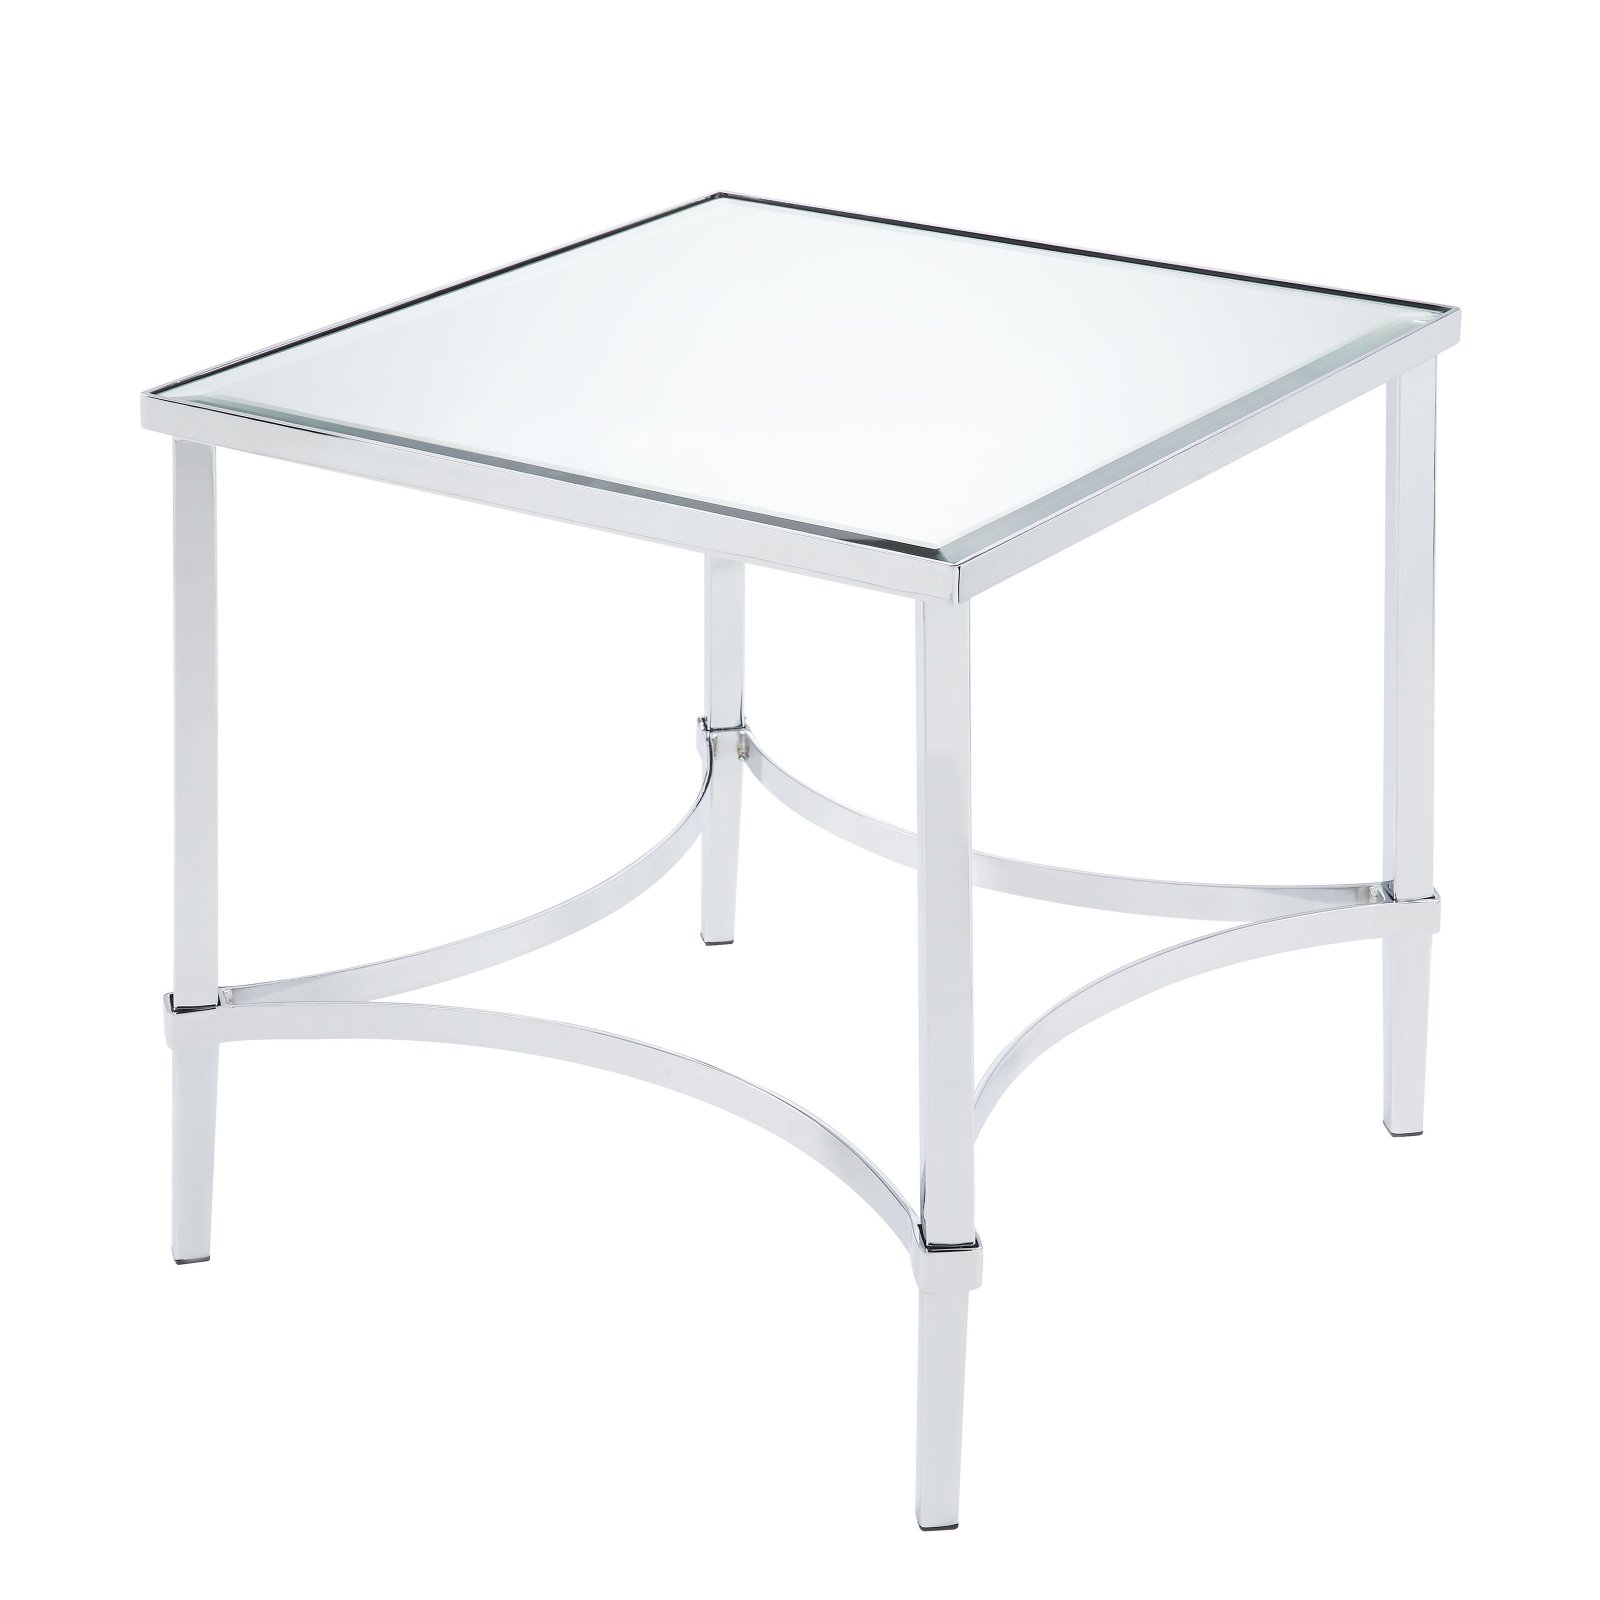 ACME 80192 Petunia End Table - Chrome & Mirror - 24 x 22 x 22 in. - image 1 of 4